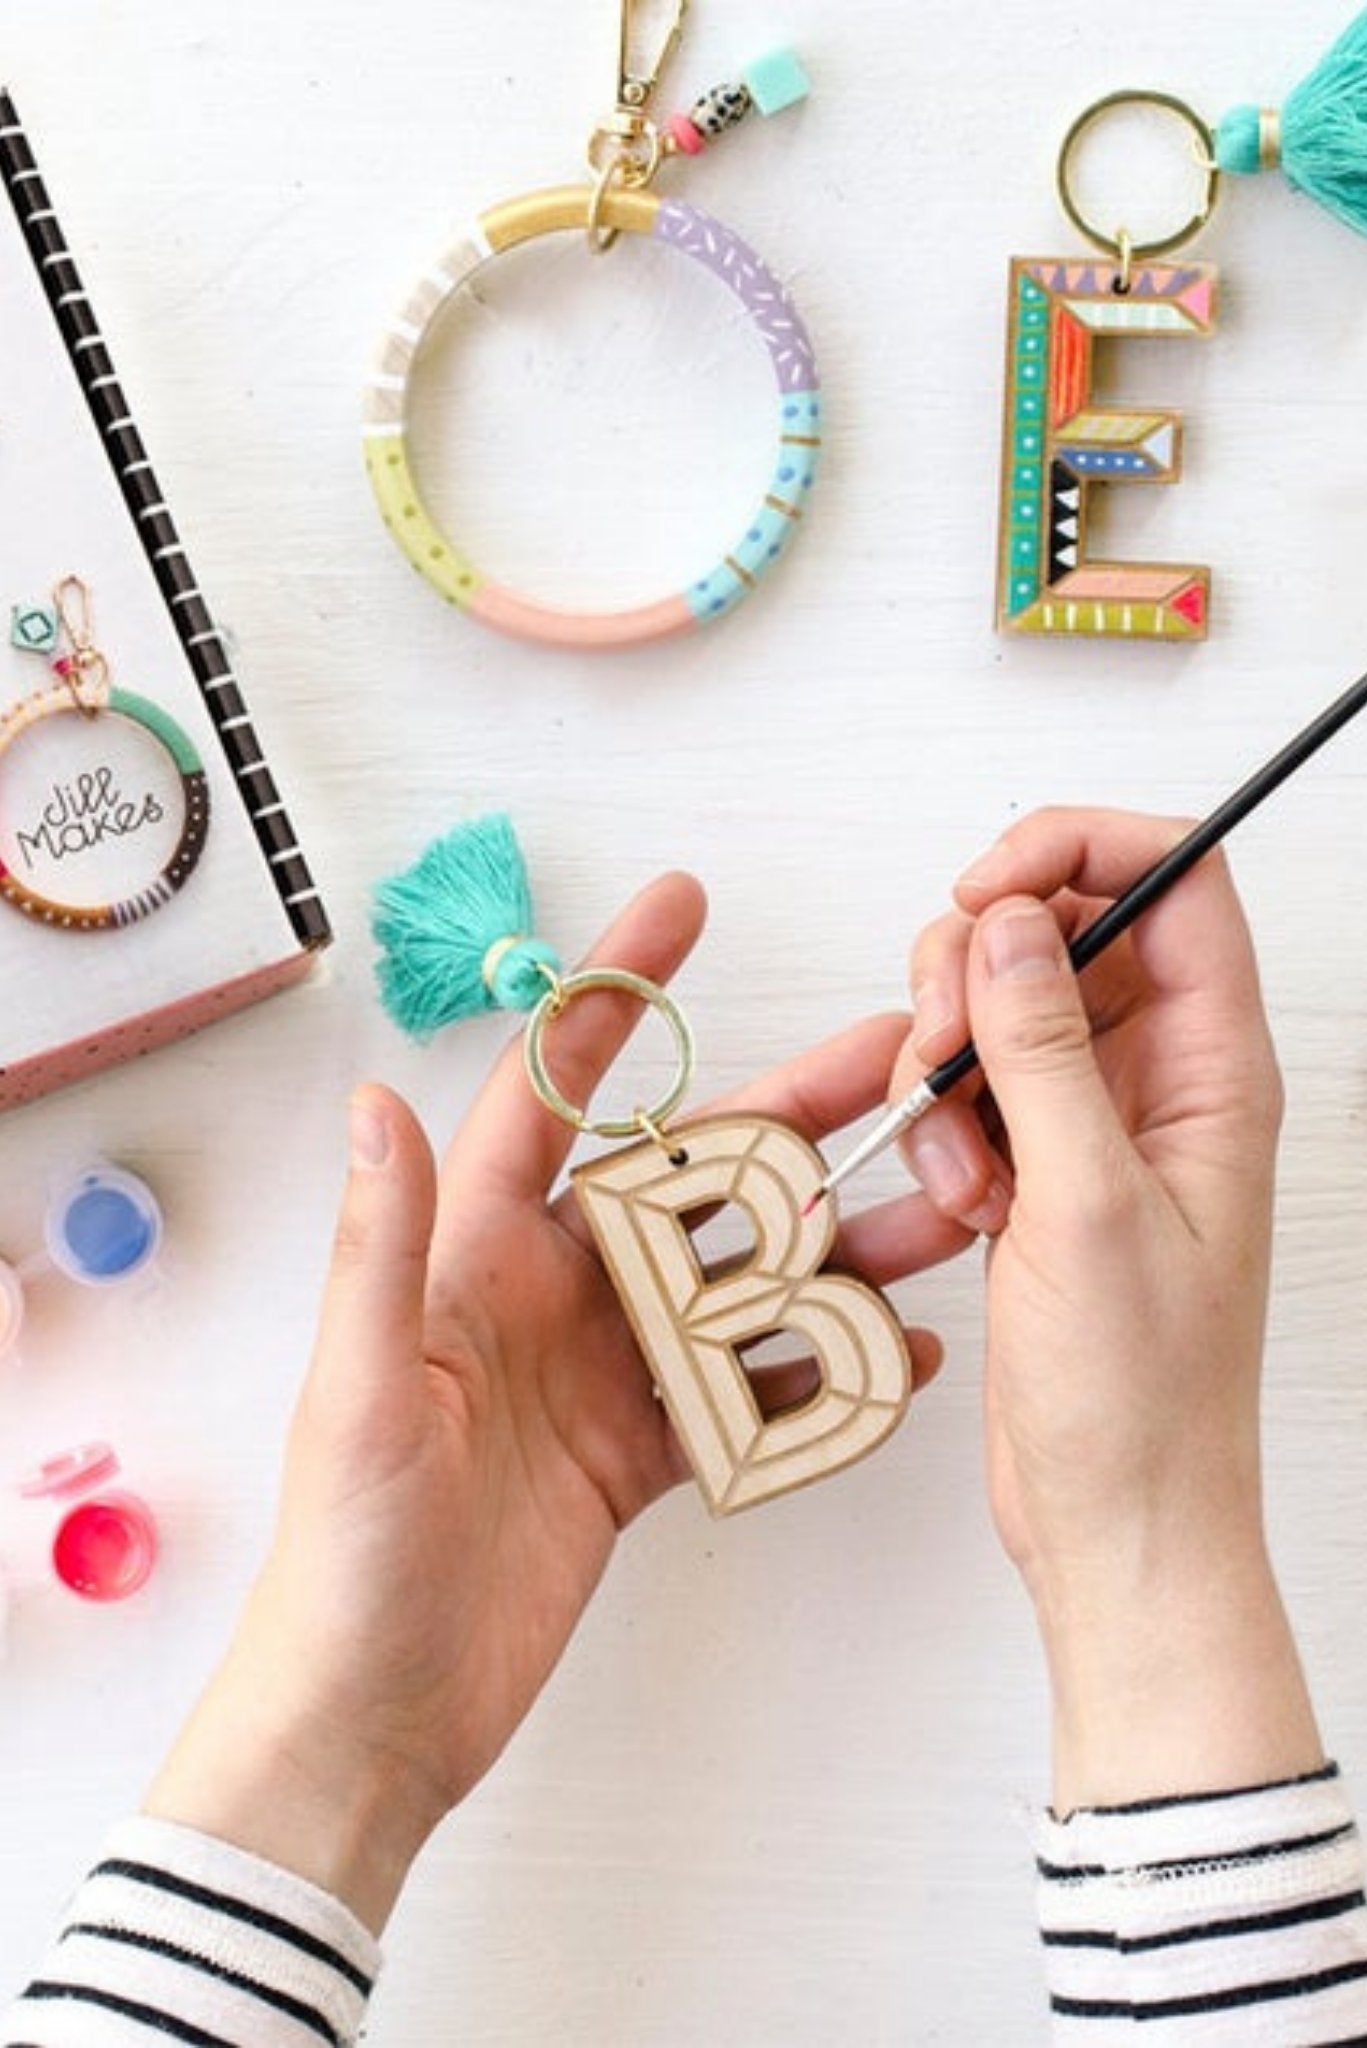 Get Your Own Keychain Painting Kit - Pretty Collected